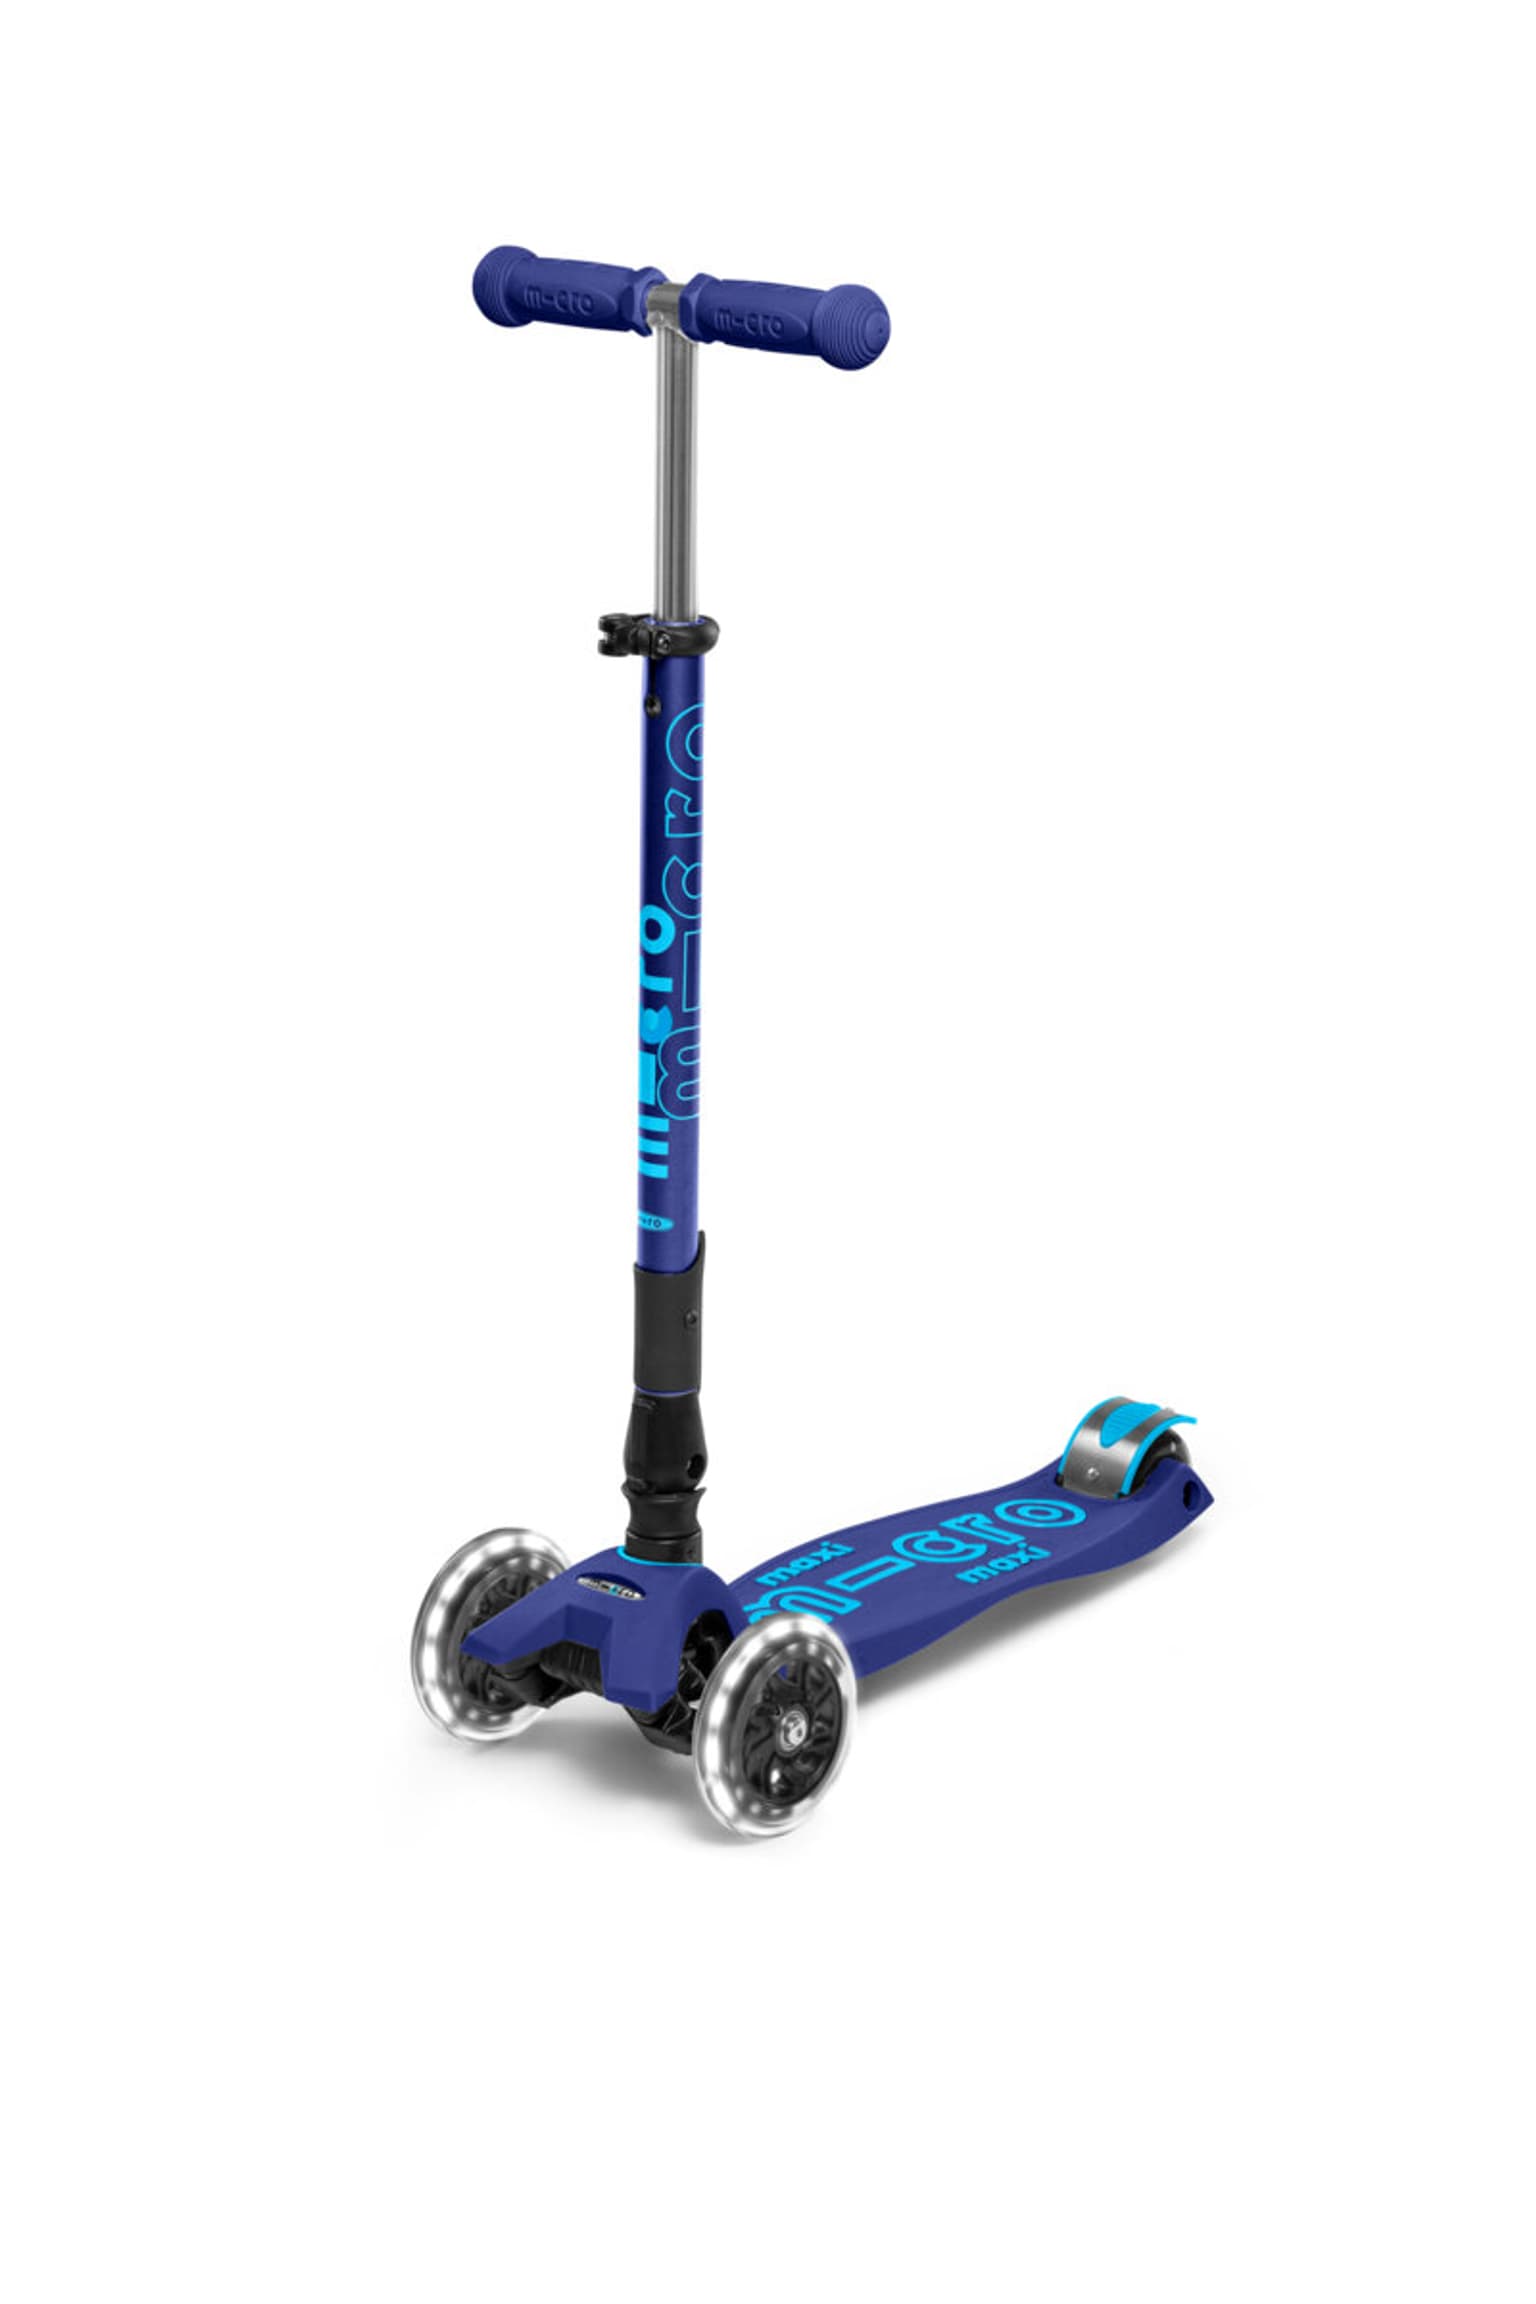 Micro Micro Maxi Deluxe Foldable LED Scooter 1